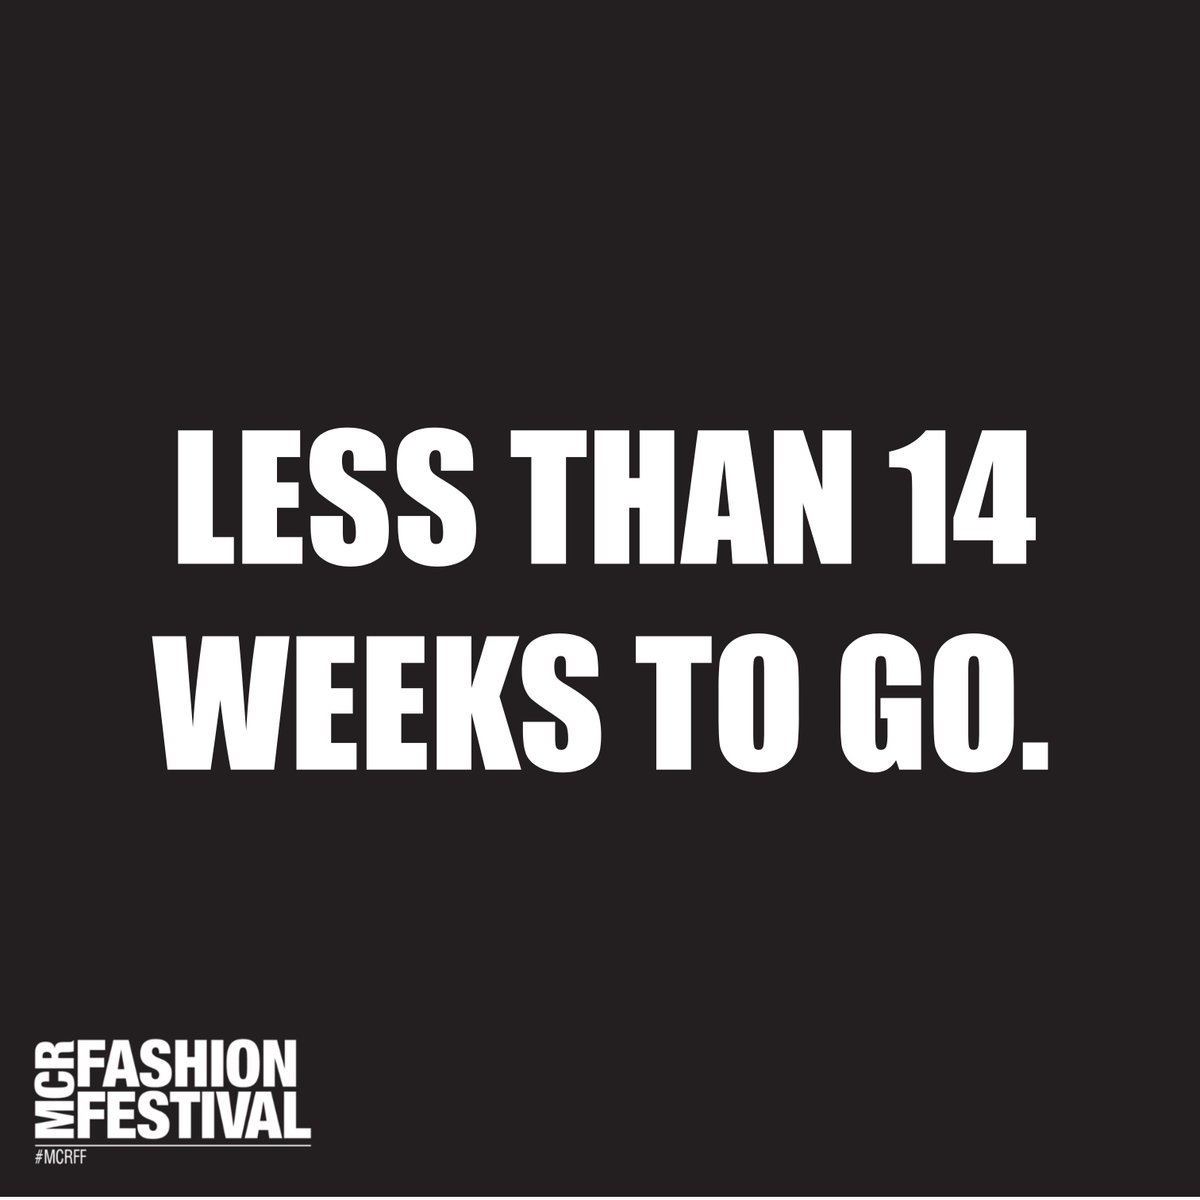 14 weeks to go 🙌🏻🖤
ow.ly/qyrN30p4jxu

#MCRFF #Manchester #manchesterfashion #manchesterevent #event #friday #countdown #entertainment #food #drink #mcr #mcrdeansgate #Manc #ManchesterHour #Manchesterinspo #ManchesterNQ #ManchesterCentral #MCREvent #Tickets #whatsonMCR